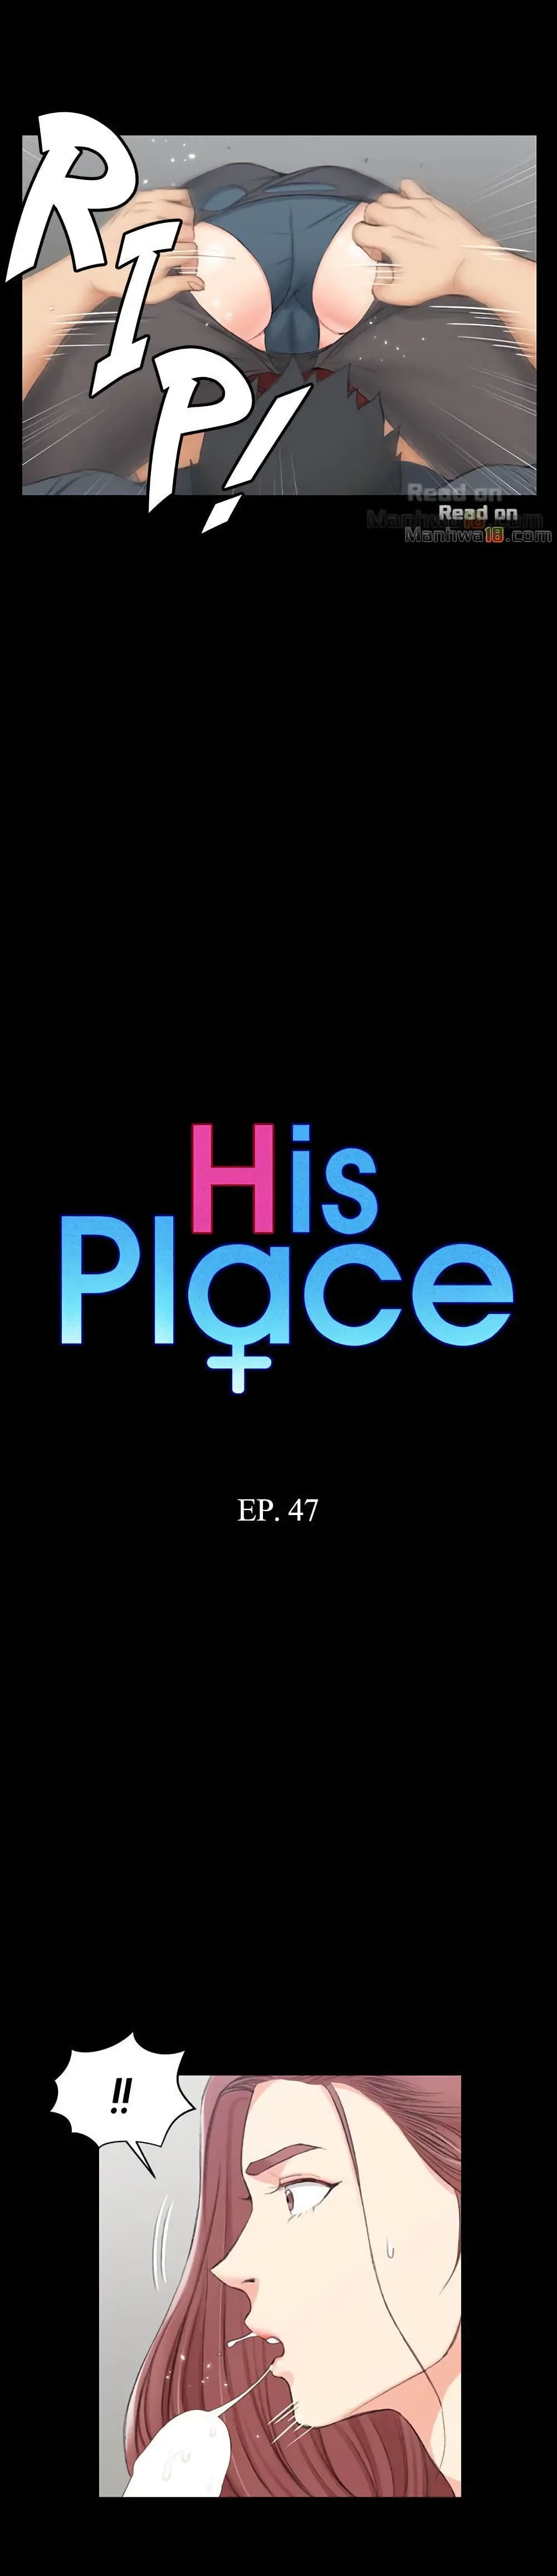 His Place 47 (2)